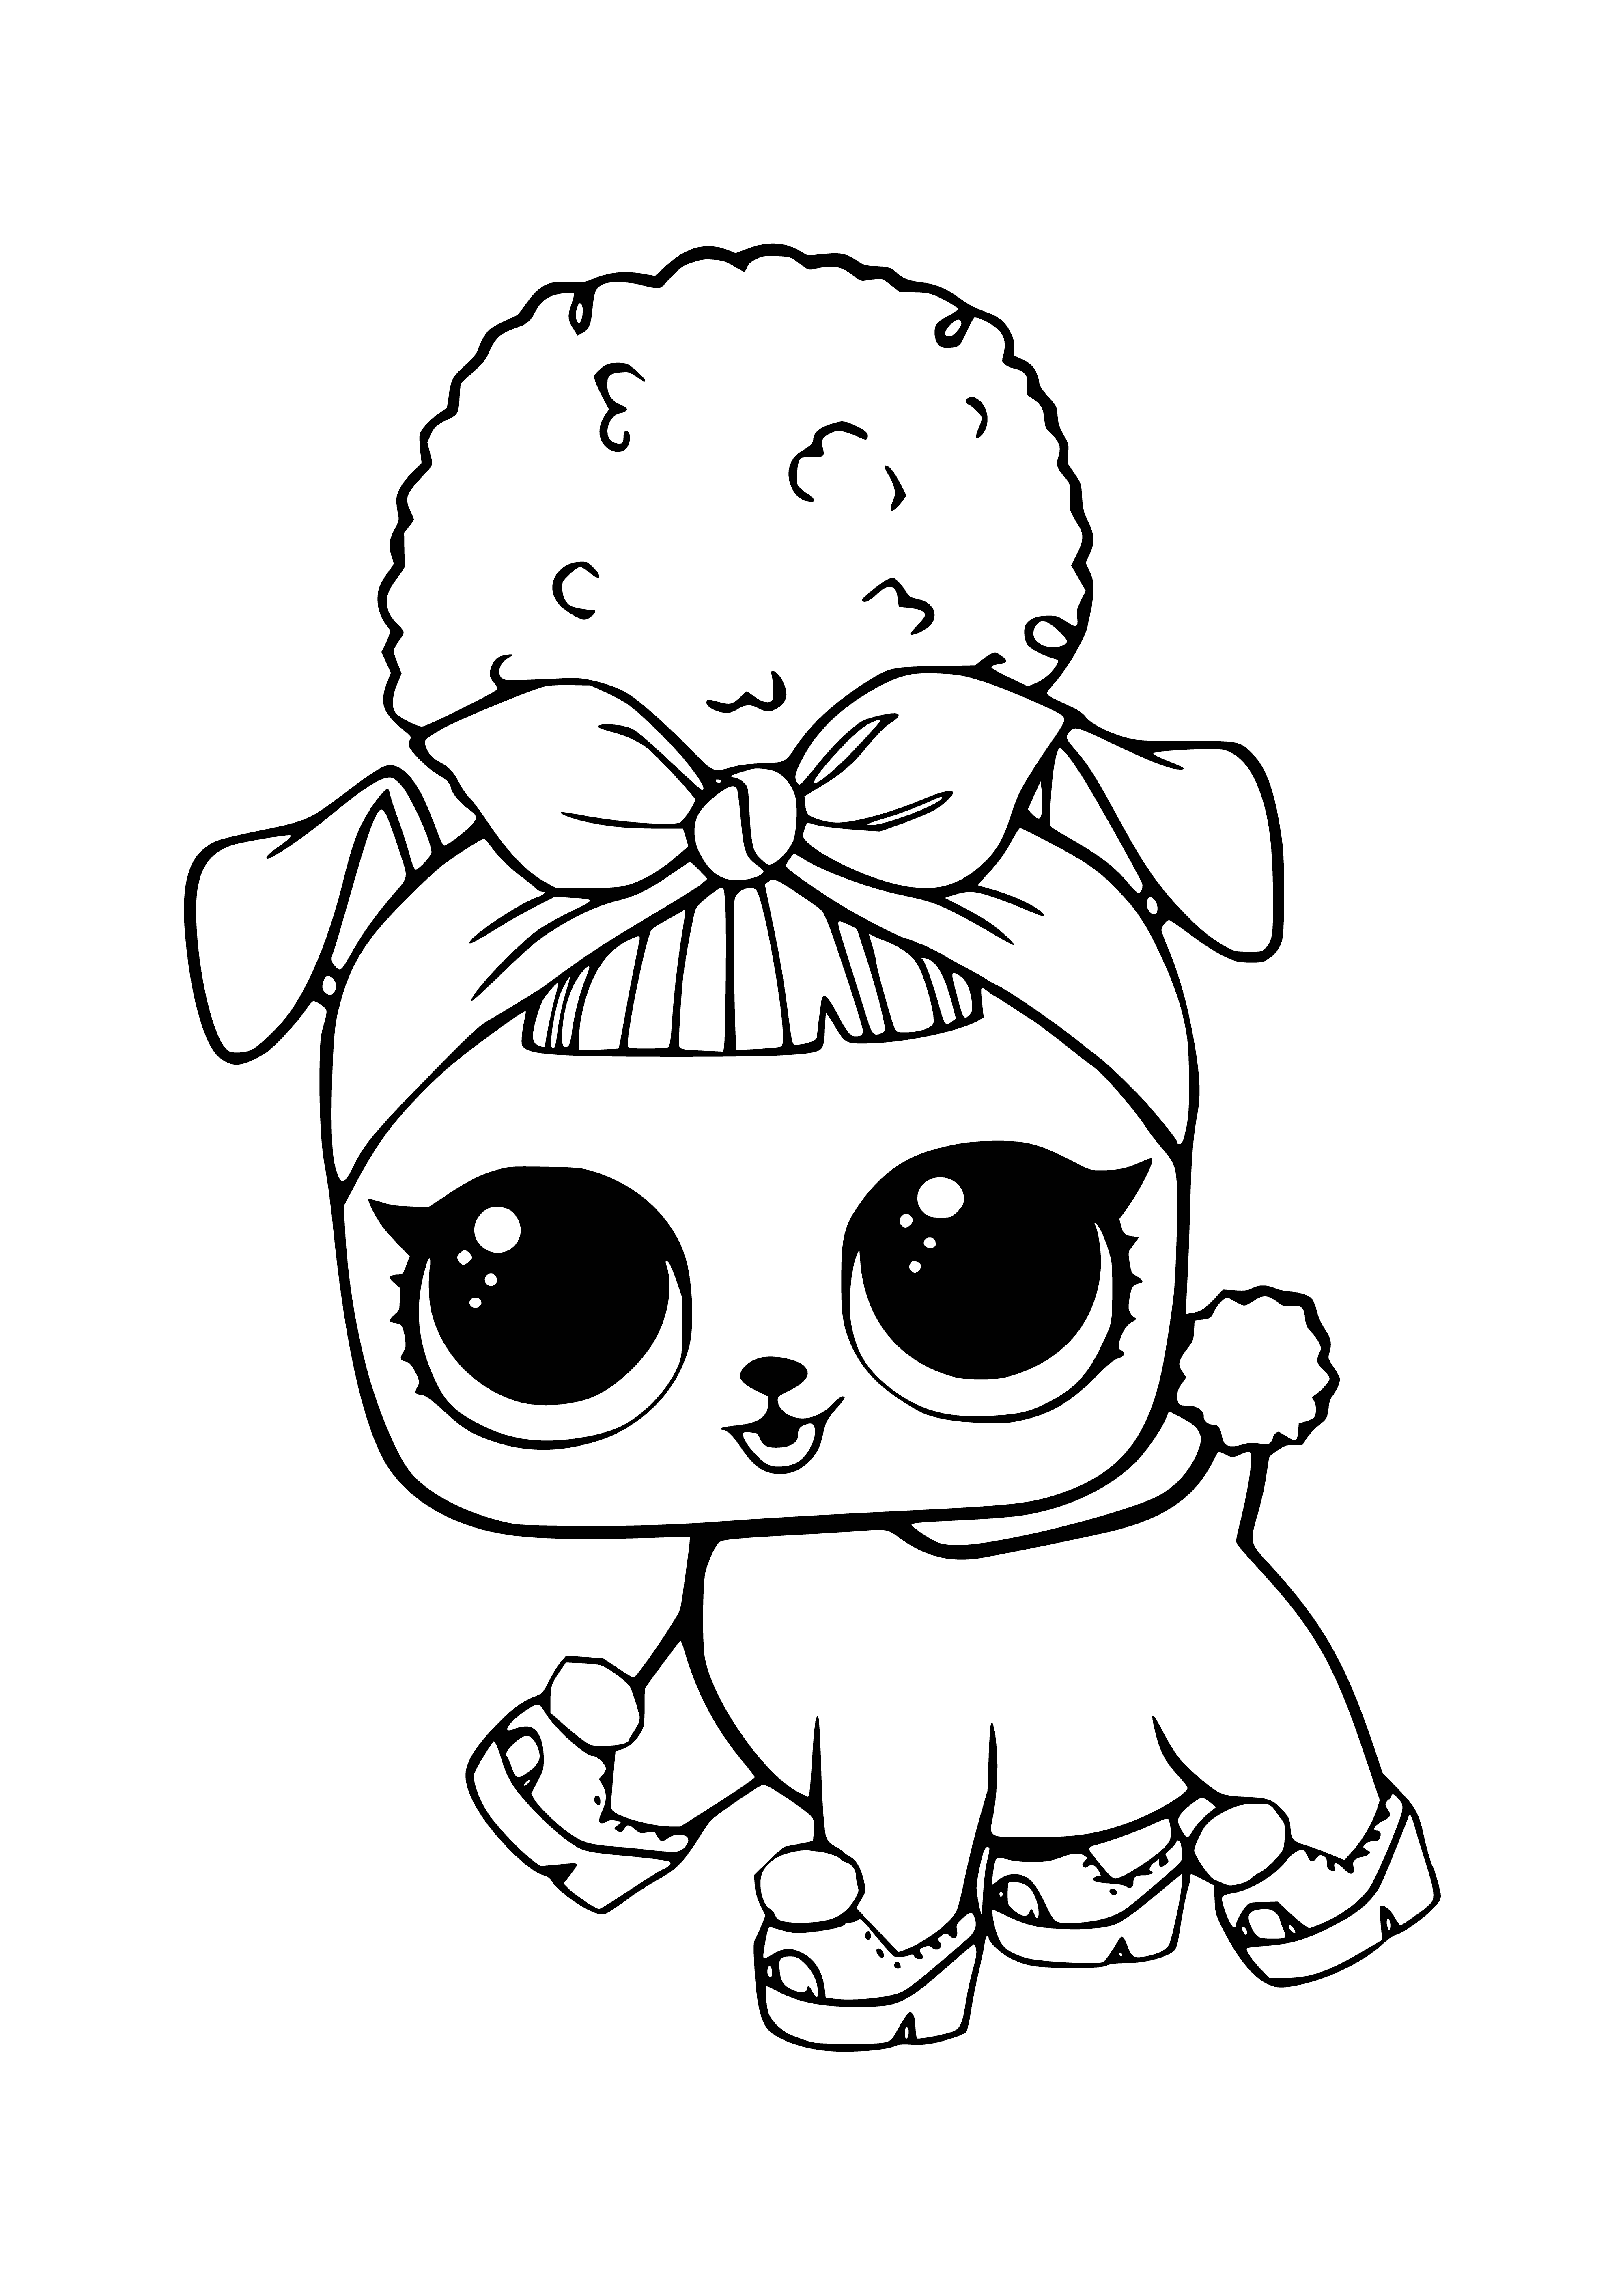 LOL pet Puppy Bee coloring page